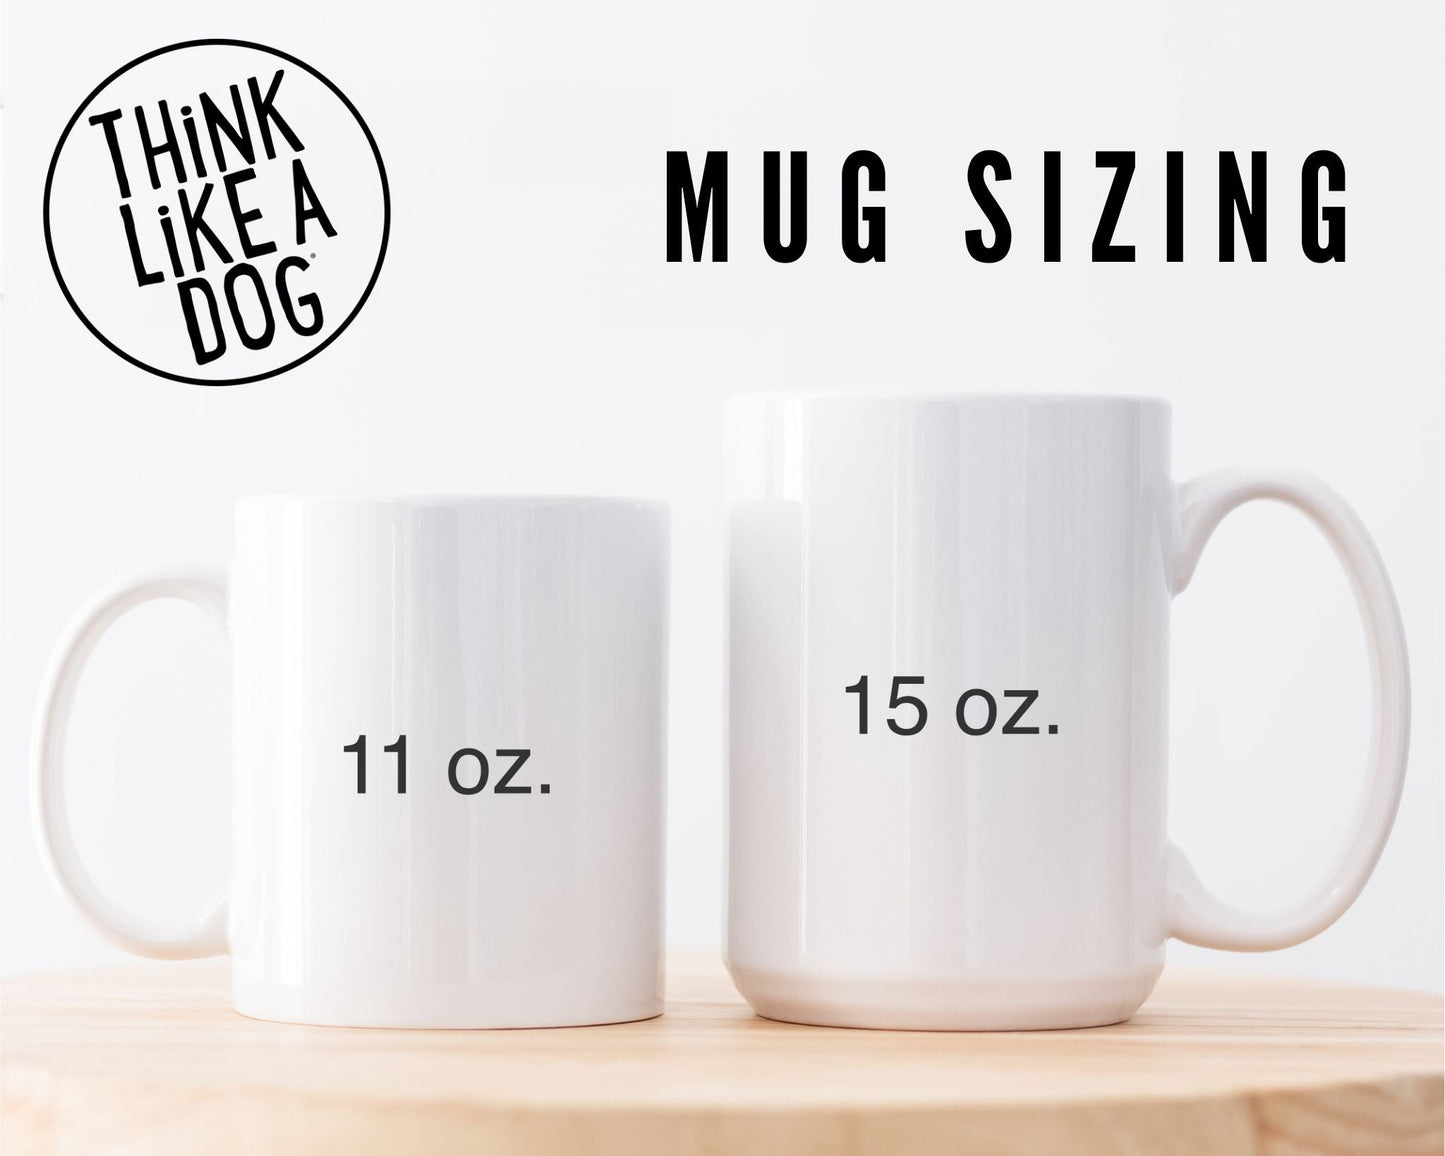 Two White Glossy Mug Teal THiNK LiKE A DOG® Logo of different sizes with their capacities labeled, 11 oz. and 15 oz., presented for a size comparison, perfect for dog lovers.